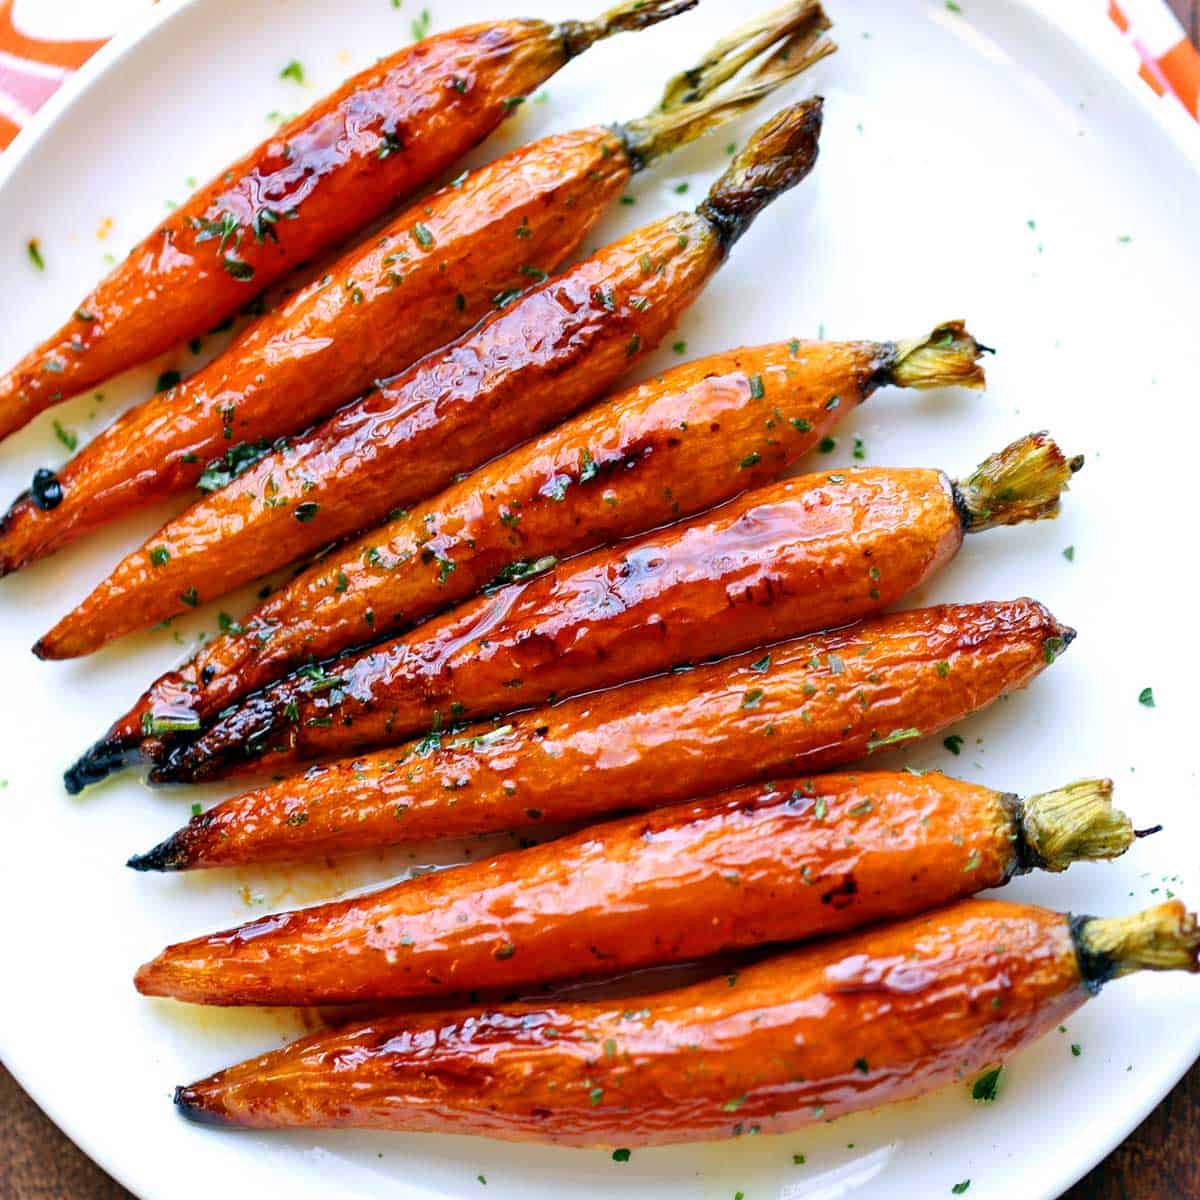 Roasted carrots served on a white plate.